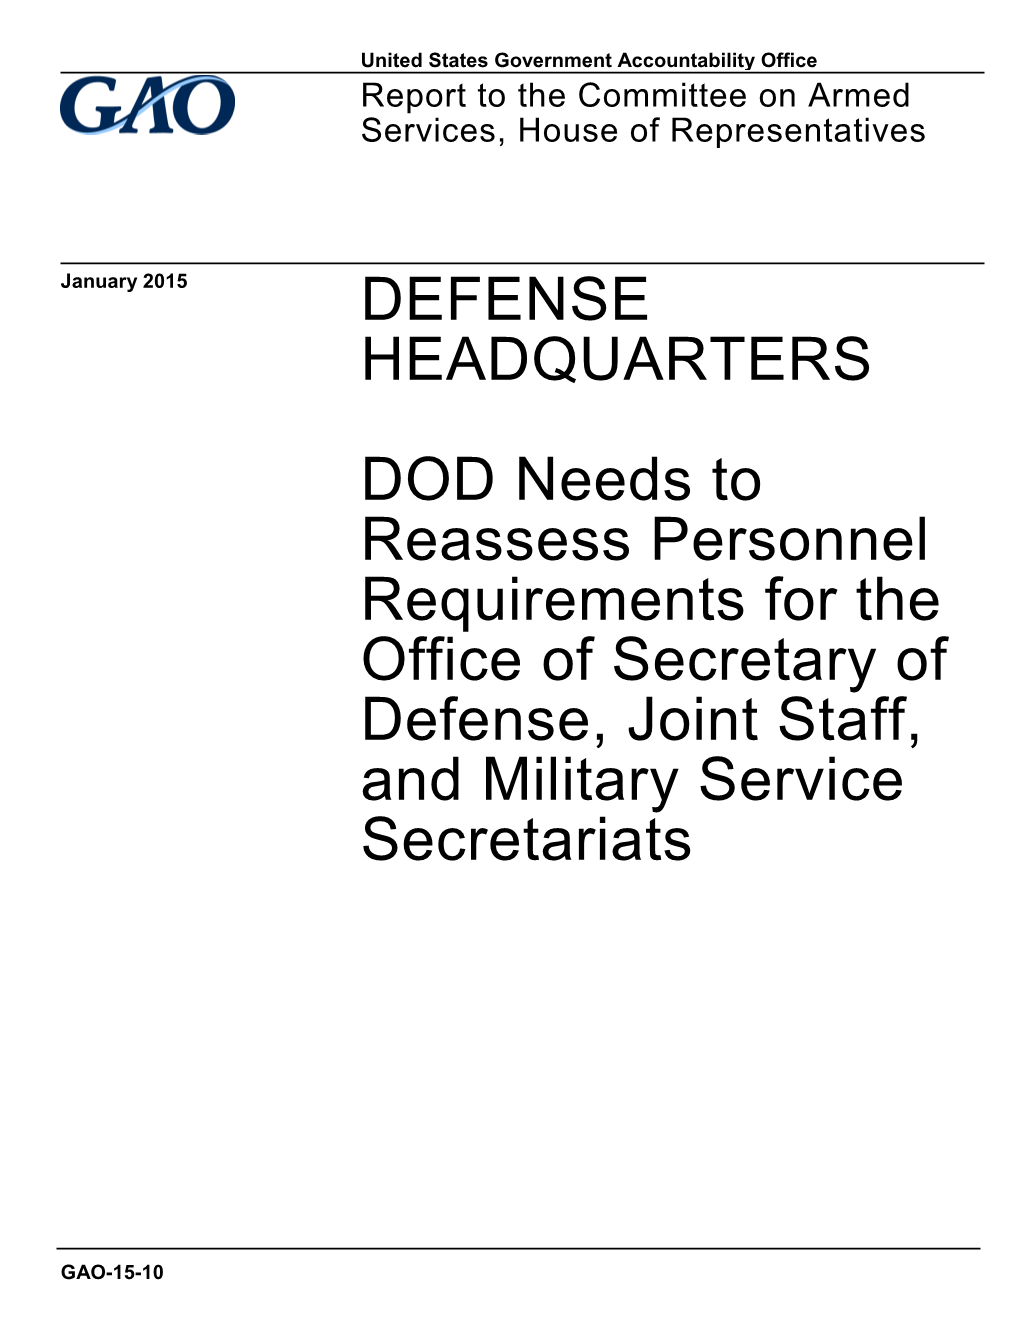 DOD Needs to Reassess Personnel Requirements for the Office of Secretary of Defense, Joint Staff, and Military Service Secretariats